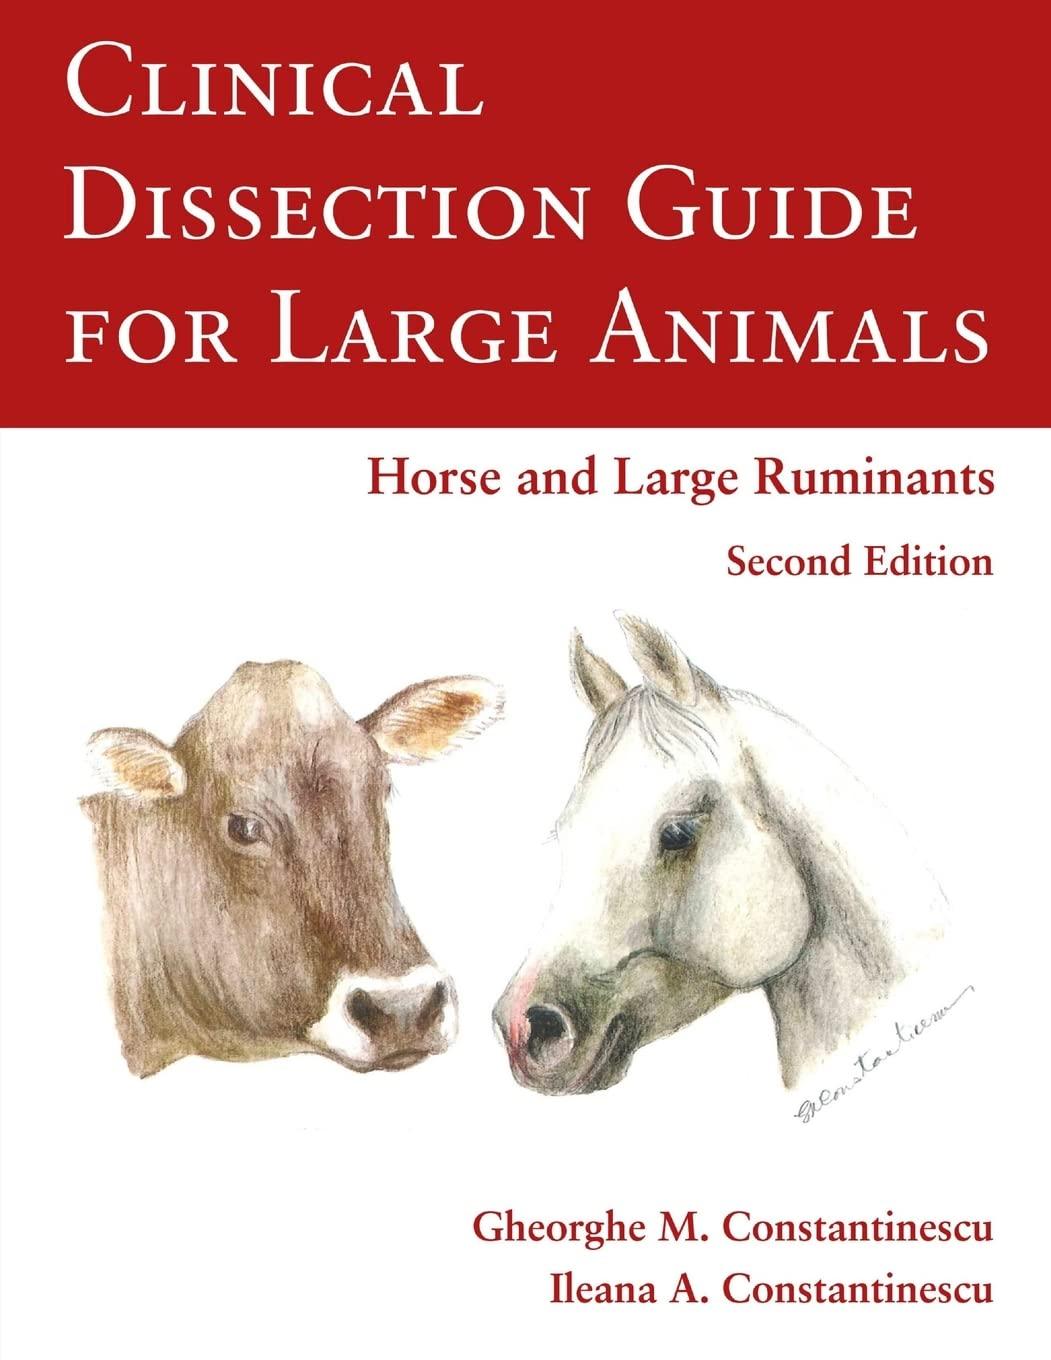 clinical dissection guide for large animals 2nd edition gheorghe constantinescu, ileana a. constantinescu